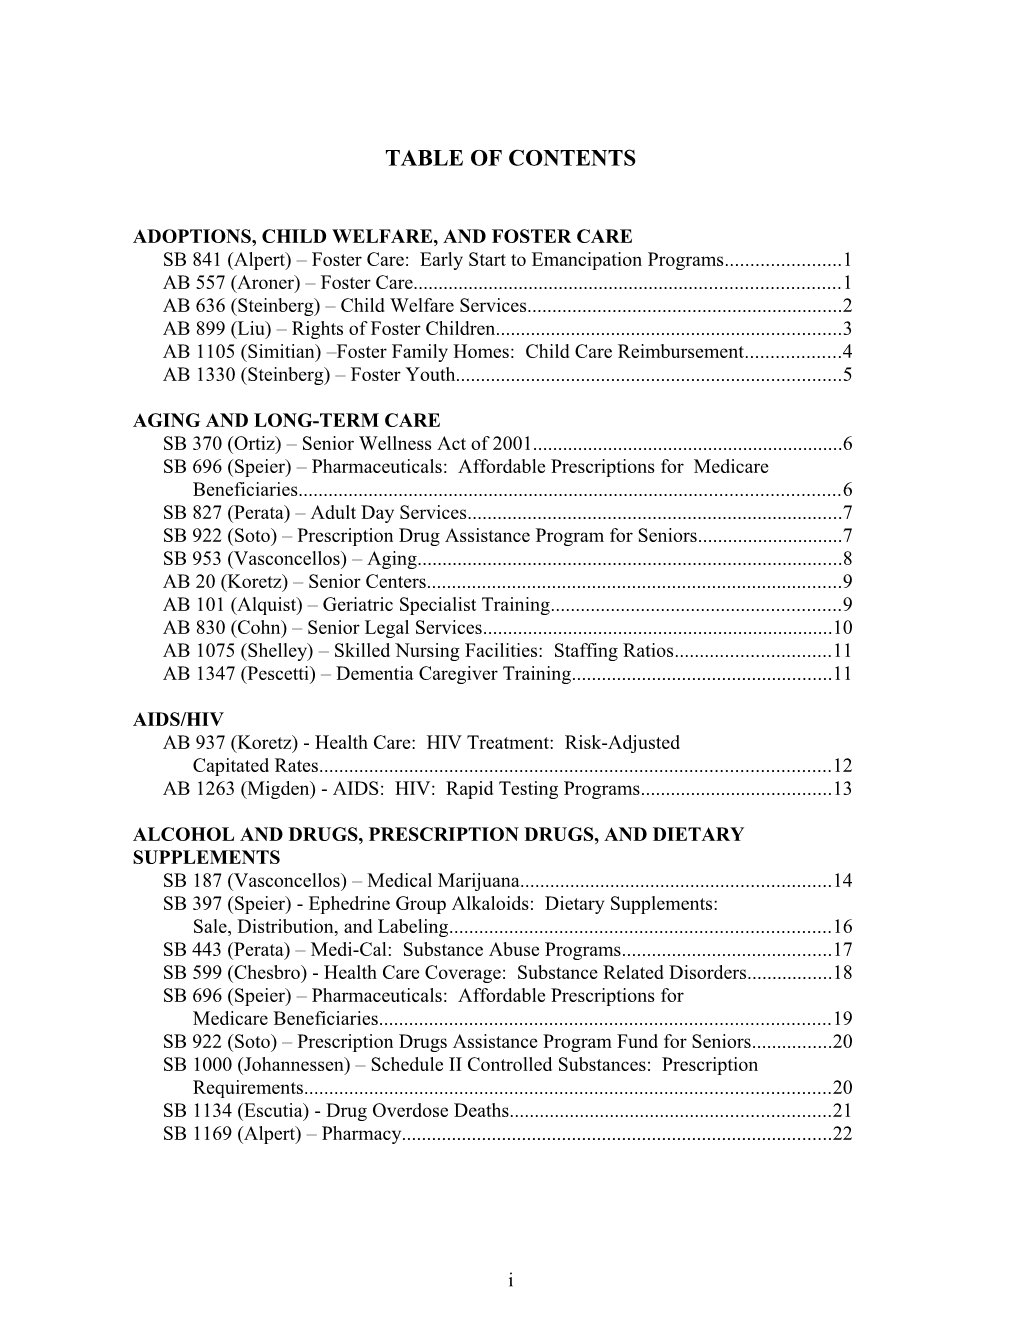 Table of Contents s77